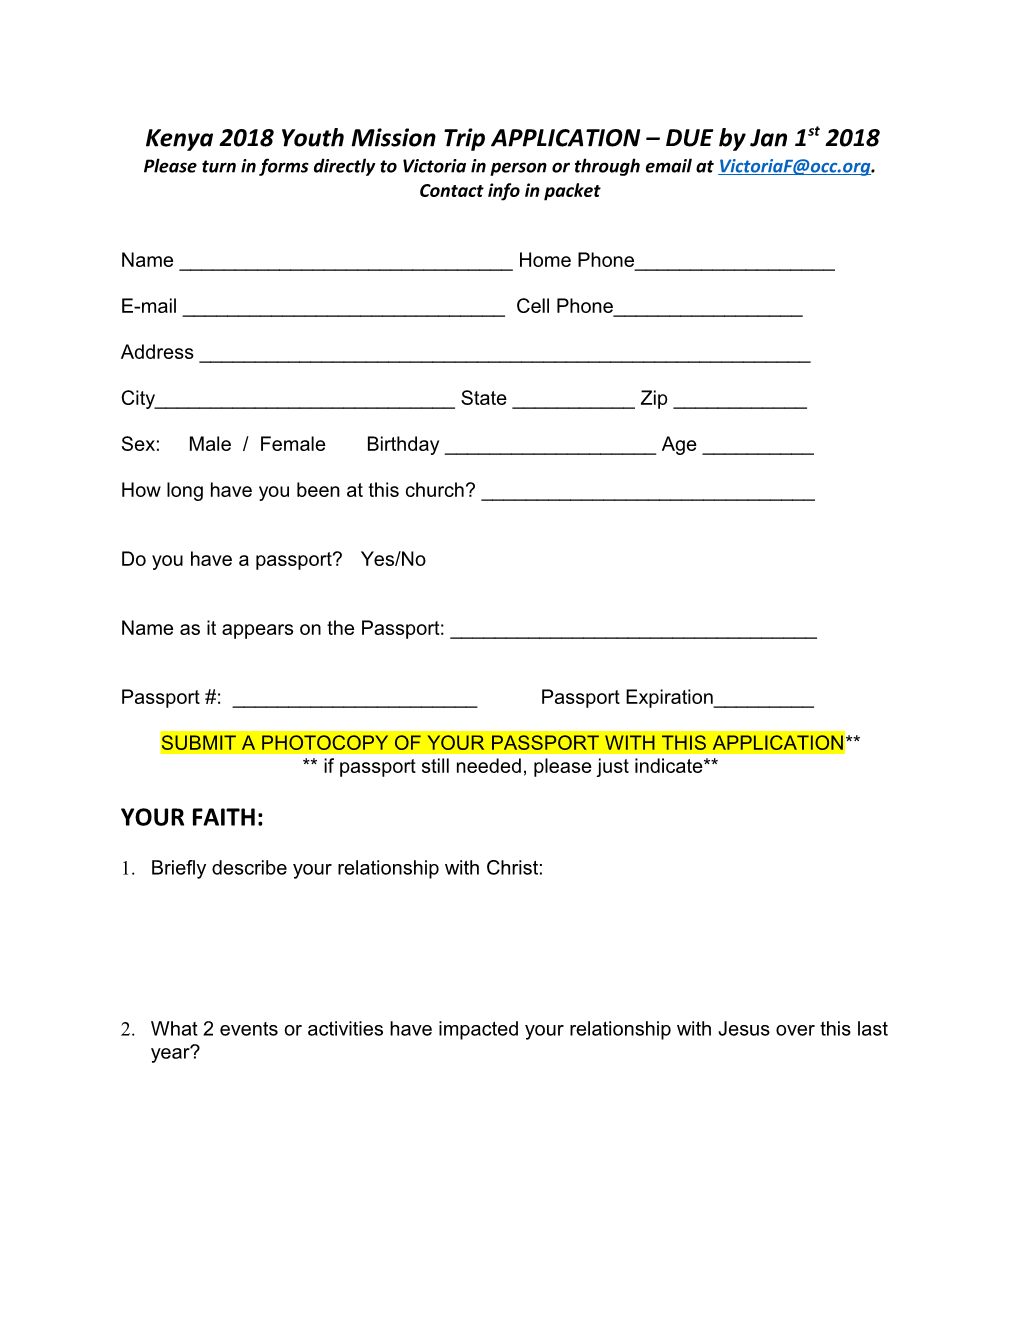 Please Turn in Forms Directly to Victoria in Person Or Through Email at . Contact Info